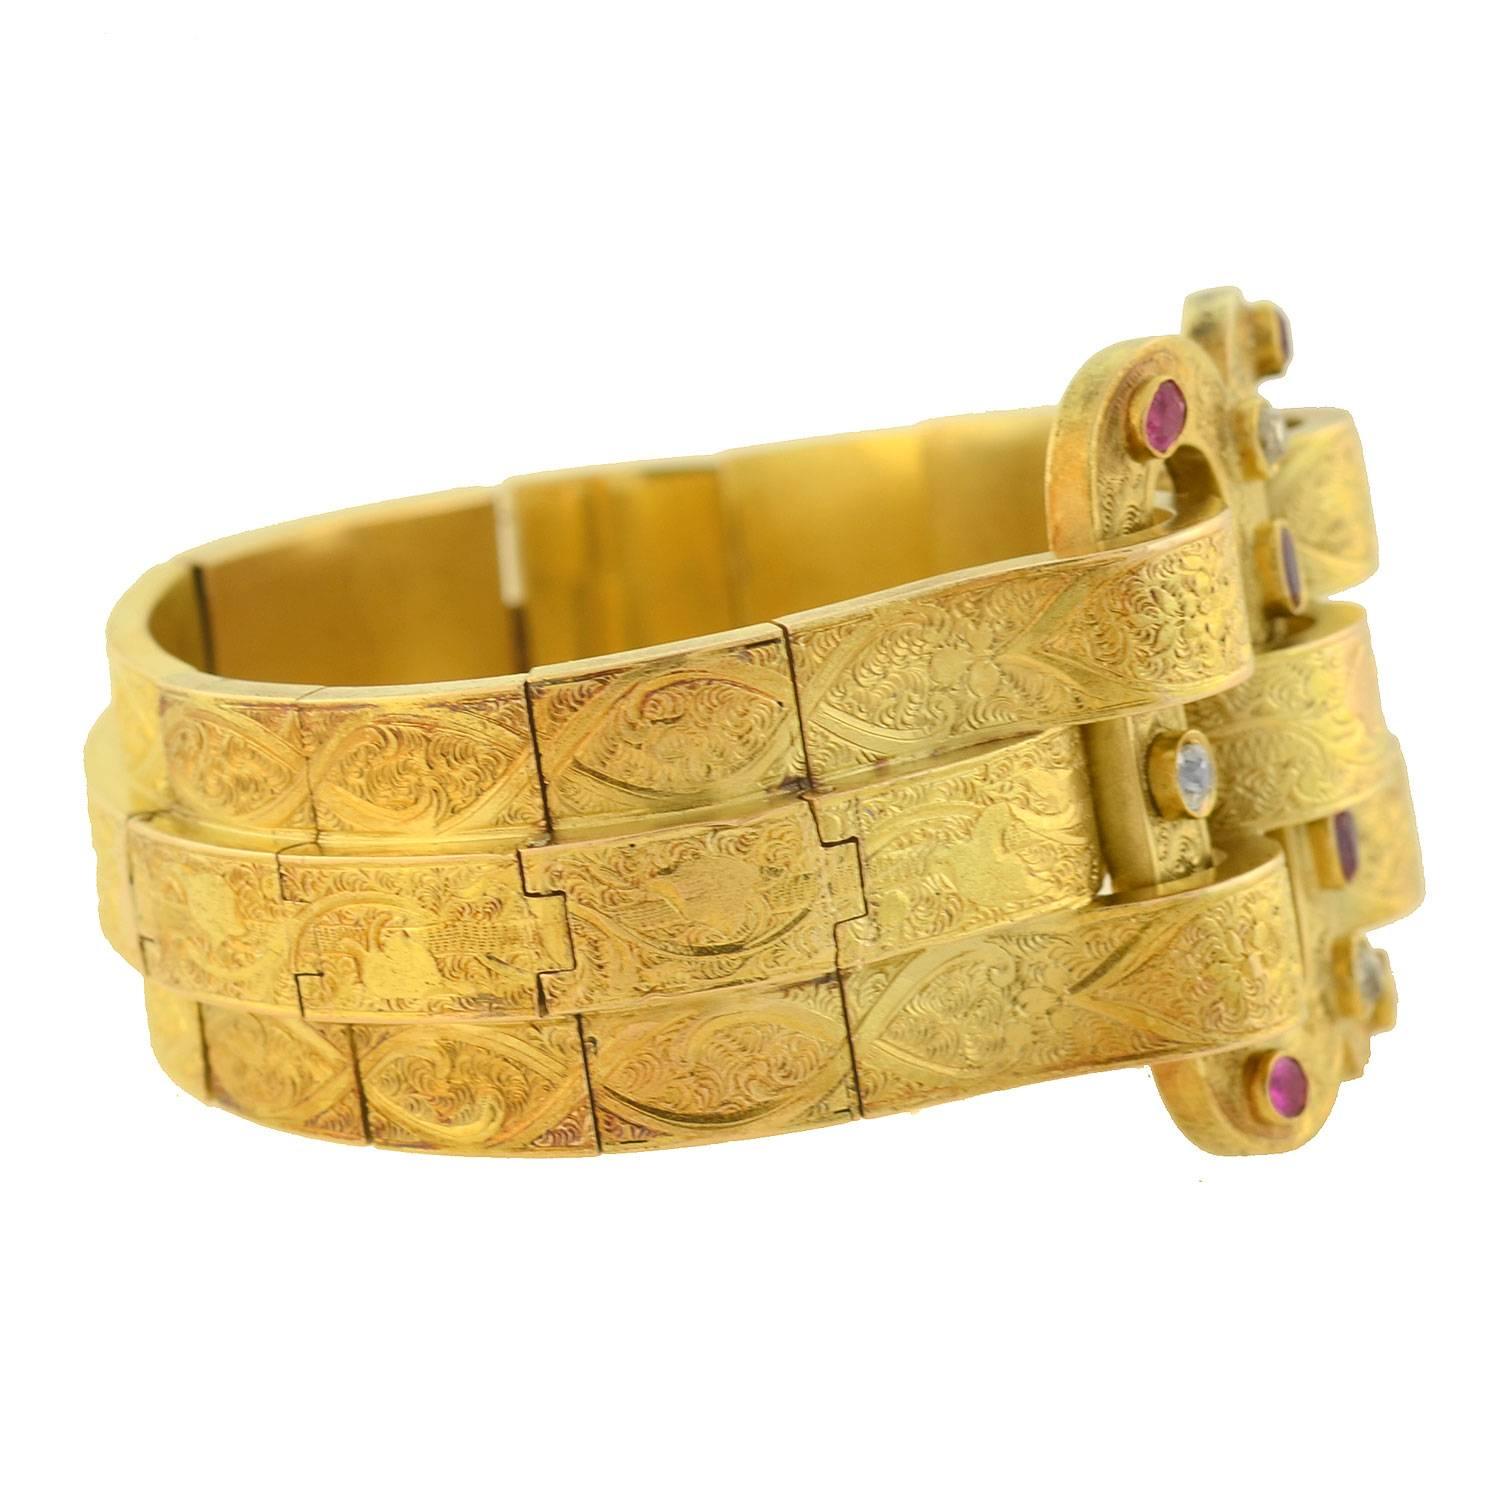 An absolutely outstanding gold bracelet from the Victorian (ca1880) era! This incredible 3-dimensional piece is crafted in vibrant 15kt yellow gold, and is quite substantial in both size and appearance. A large double buckle-like design rests at the